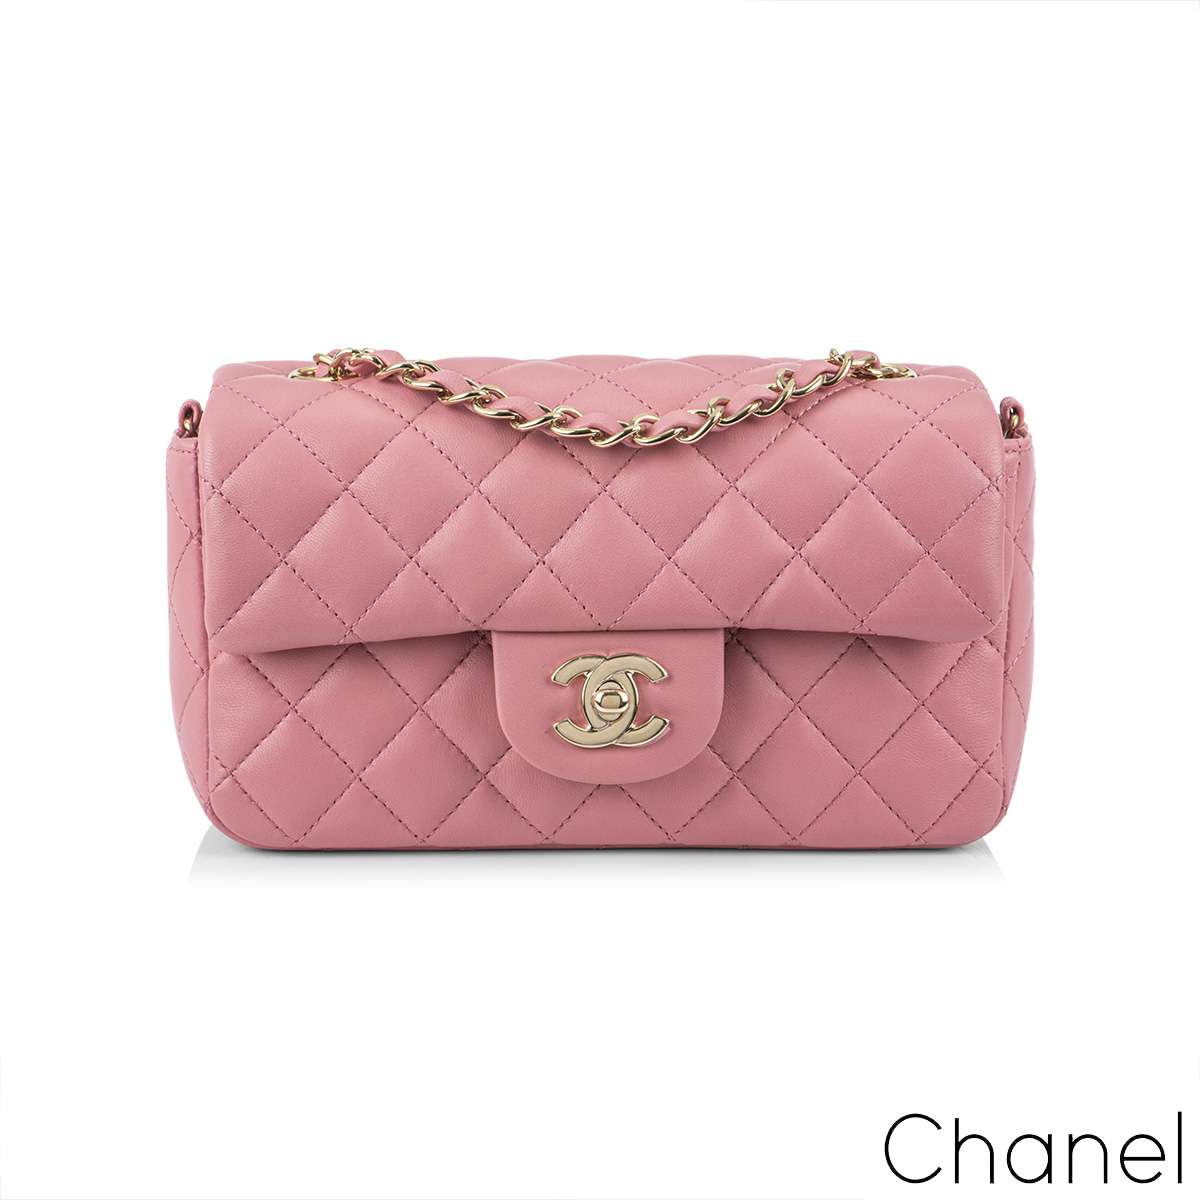 Chanel 22K Small Flap Bag with Top Handle đen da caviar GHW best quality